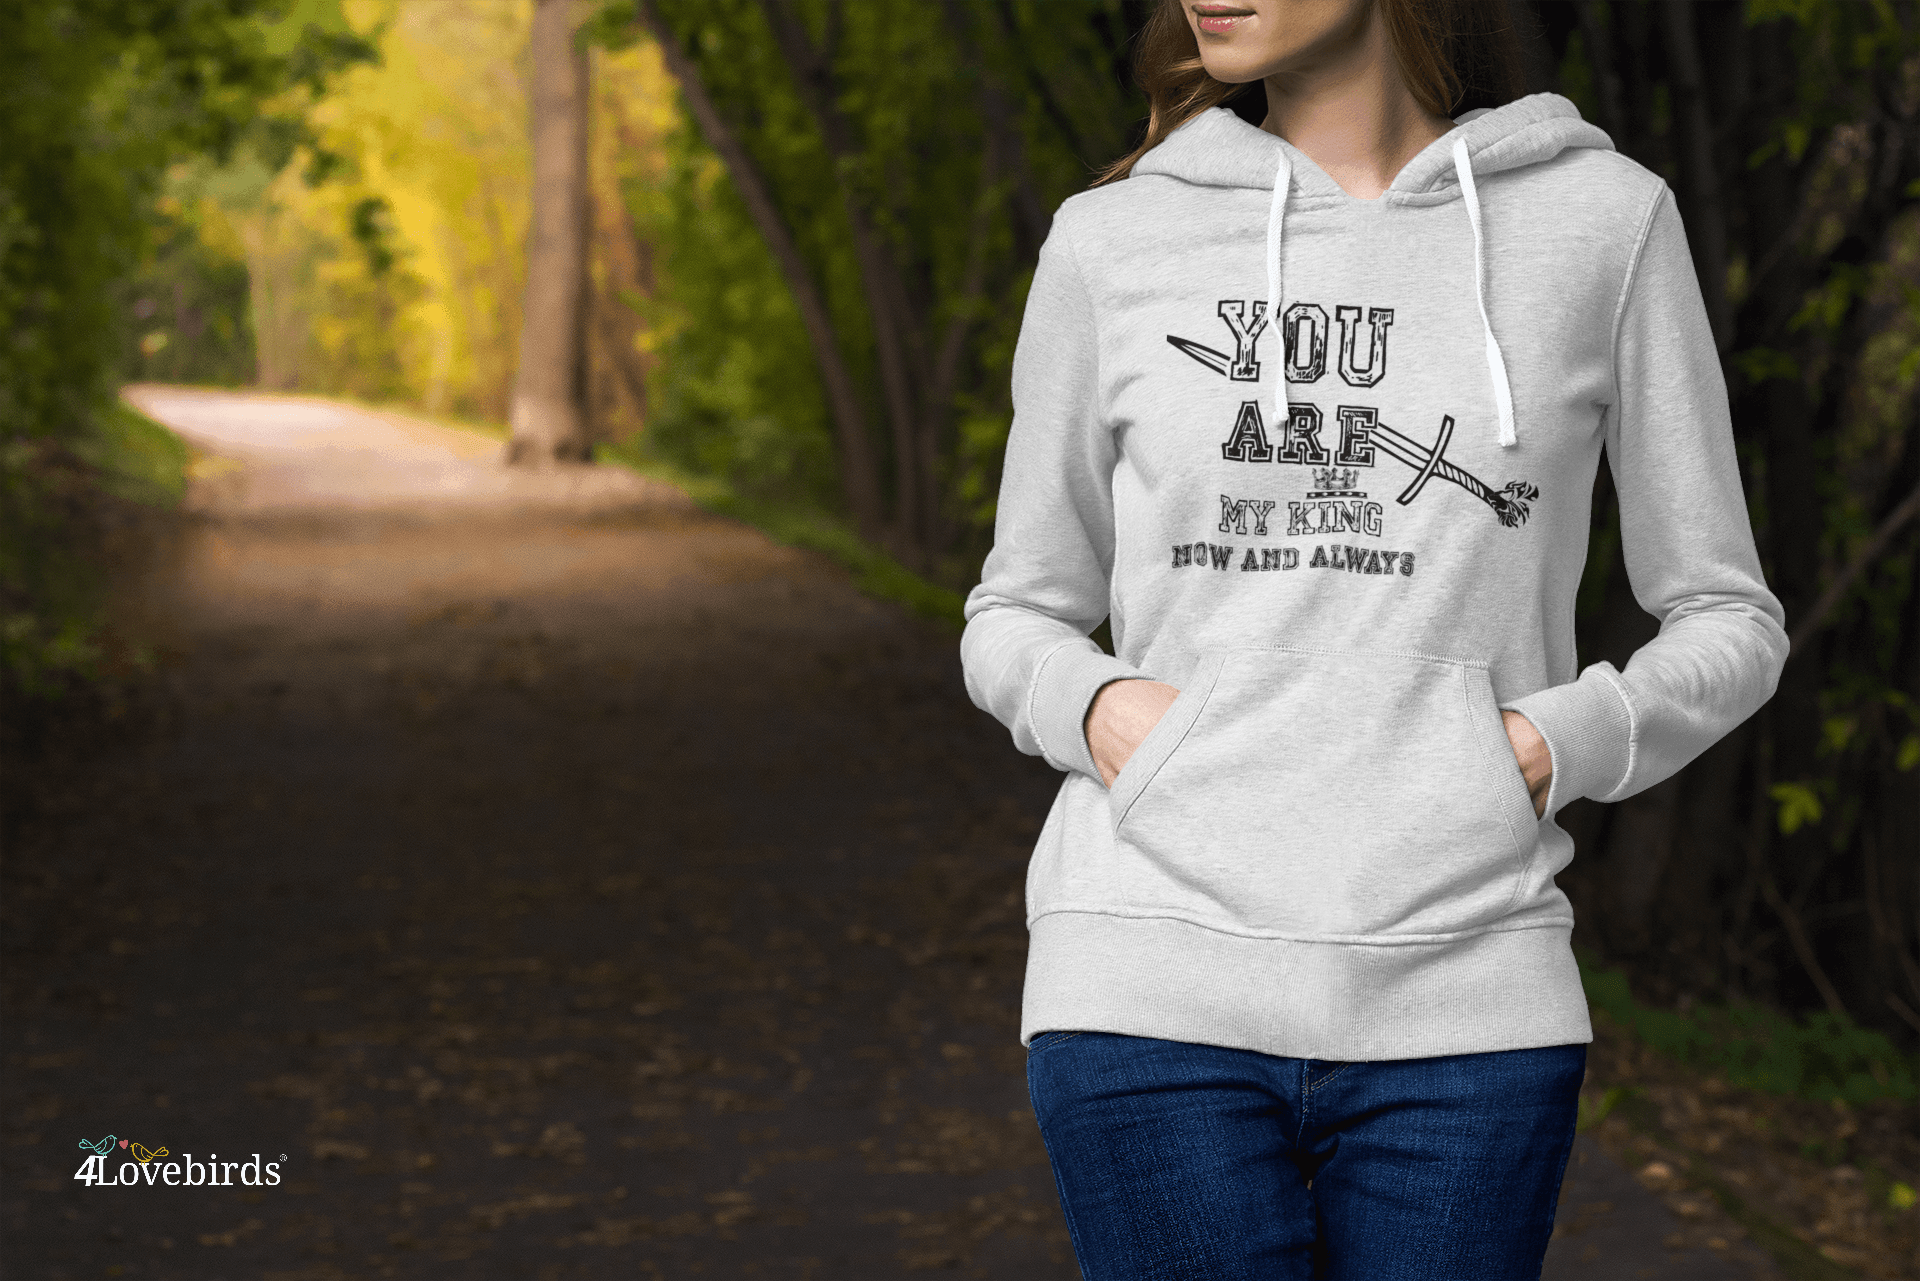 Couple Hoodie-You Are My Queen You Are My King Now And Always Hoodie-Matching Hoodie-Gift For Her,Him-Couple Shirt-His and Hers Hoodie - 4Lovebirds